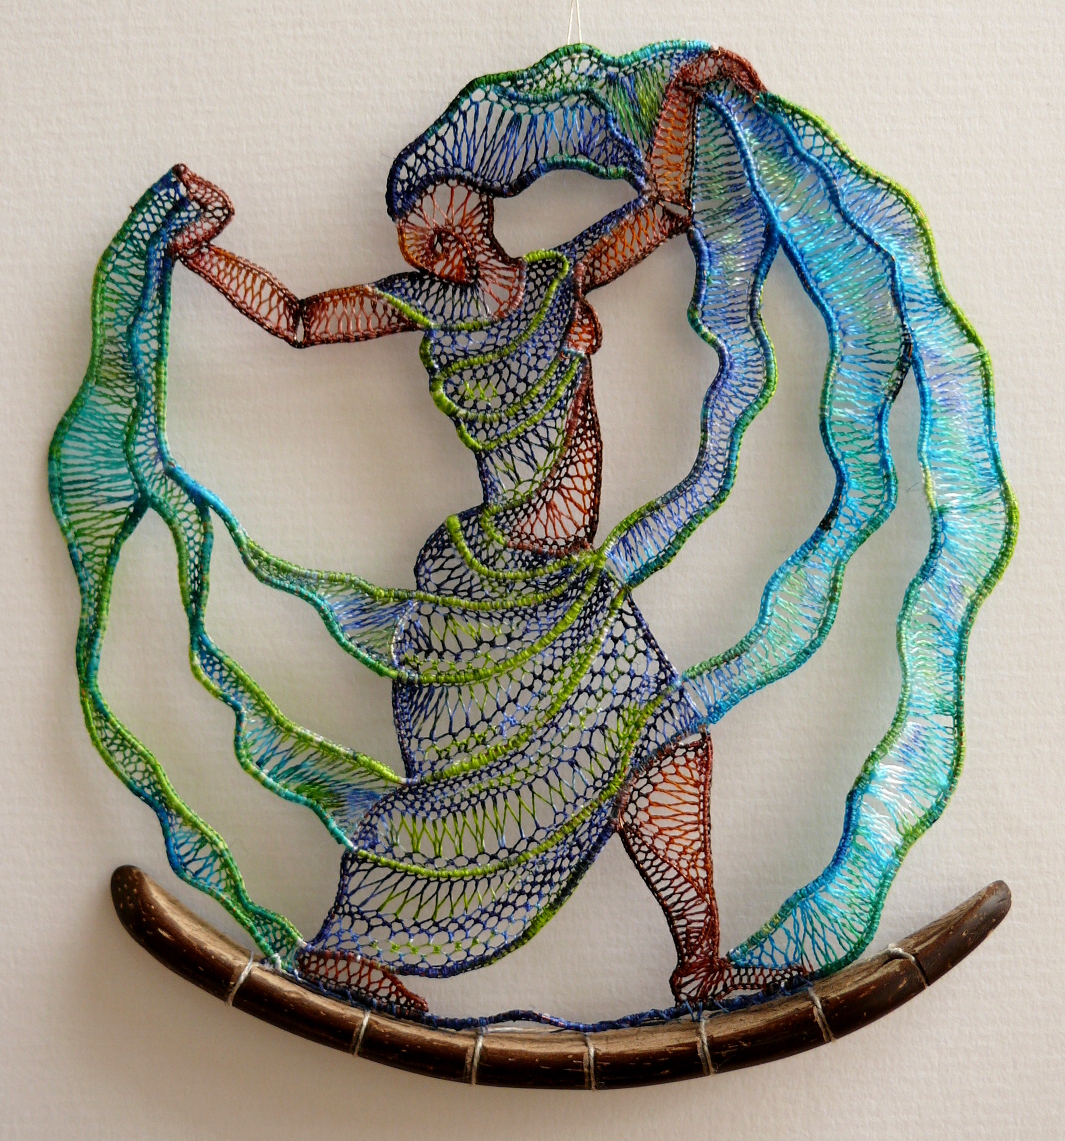 Original artwork by Ágnes Herczeg, featured by Julia Titchfield on Feeling Stitchy